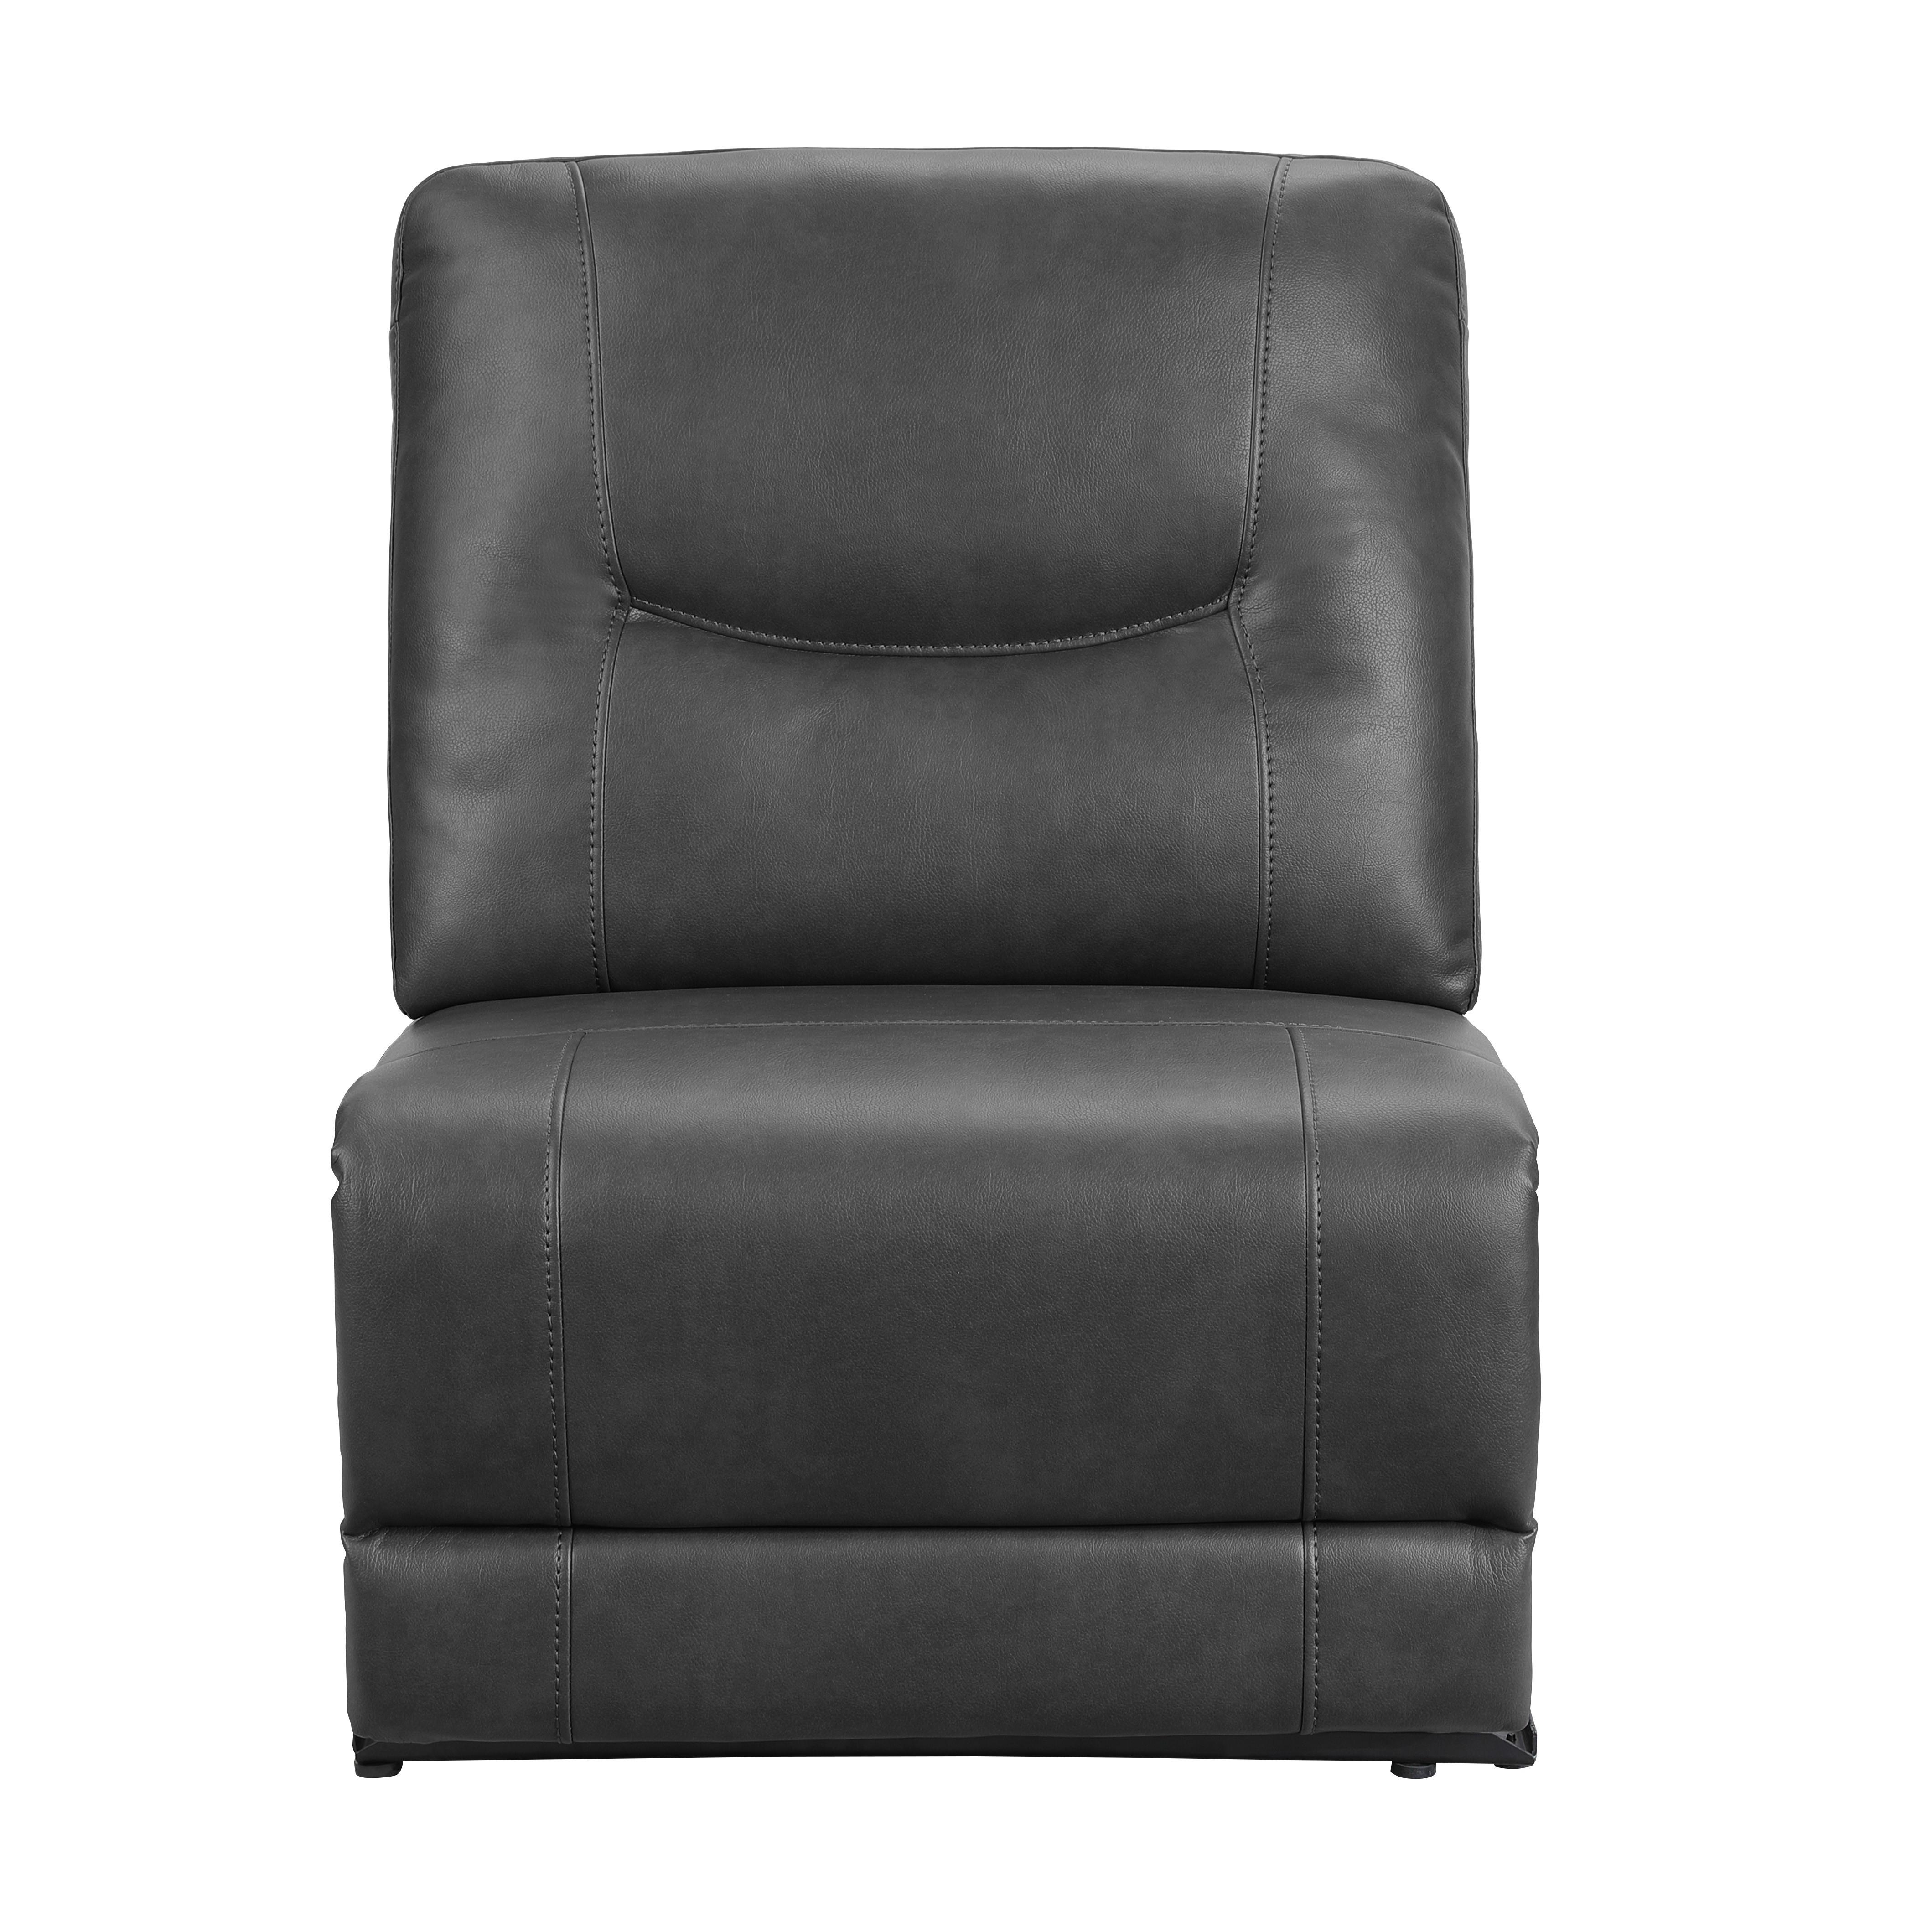 Modern Armless Chair 8490GRY-AC Columbus 8490GRY-AC in Gray Faux Leather